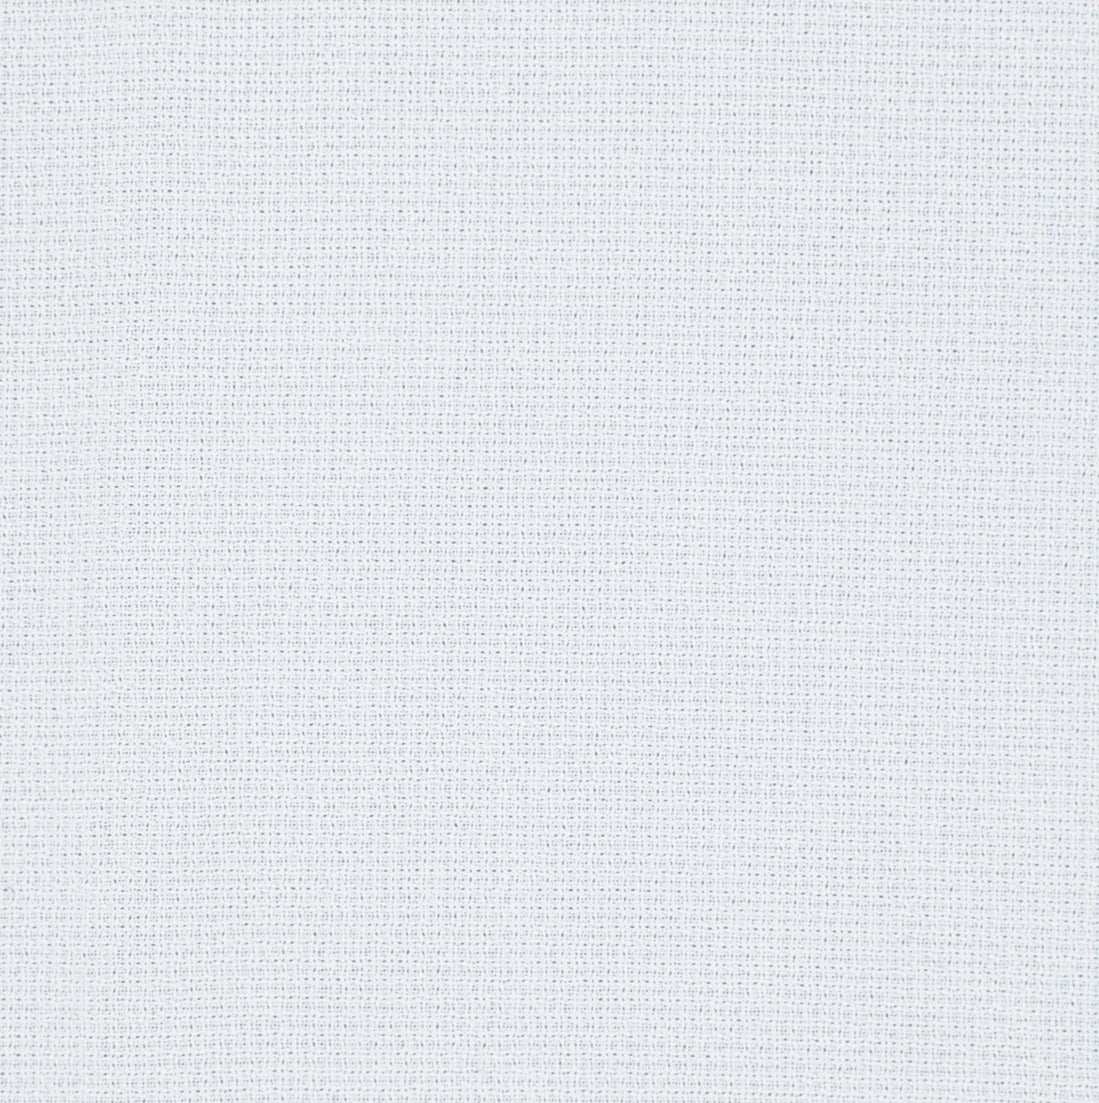 36002-01 White Polyester Crepe Plain Dyed 100% 210g/yd 54" plain dyed polyester white woven Solid Color - knit fabric - woven fabric - fabric company - fabric wholesale - fabric b2b - fabric factory - high quality fabric - hong kong fabric - fabric hk - acetate fabric - cotton fabric - linen fabric - metallic fabric - nylon fabric - polyester fabric - spandex fabric - chun wing hing - cwh hk - fabric worldwide ship - 針織布 - 梳織布 - 布料公司- 布料批發 - 香港布料 - 秦榮興